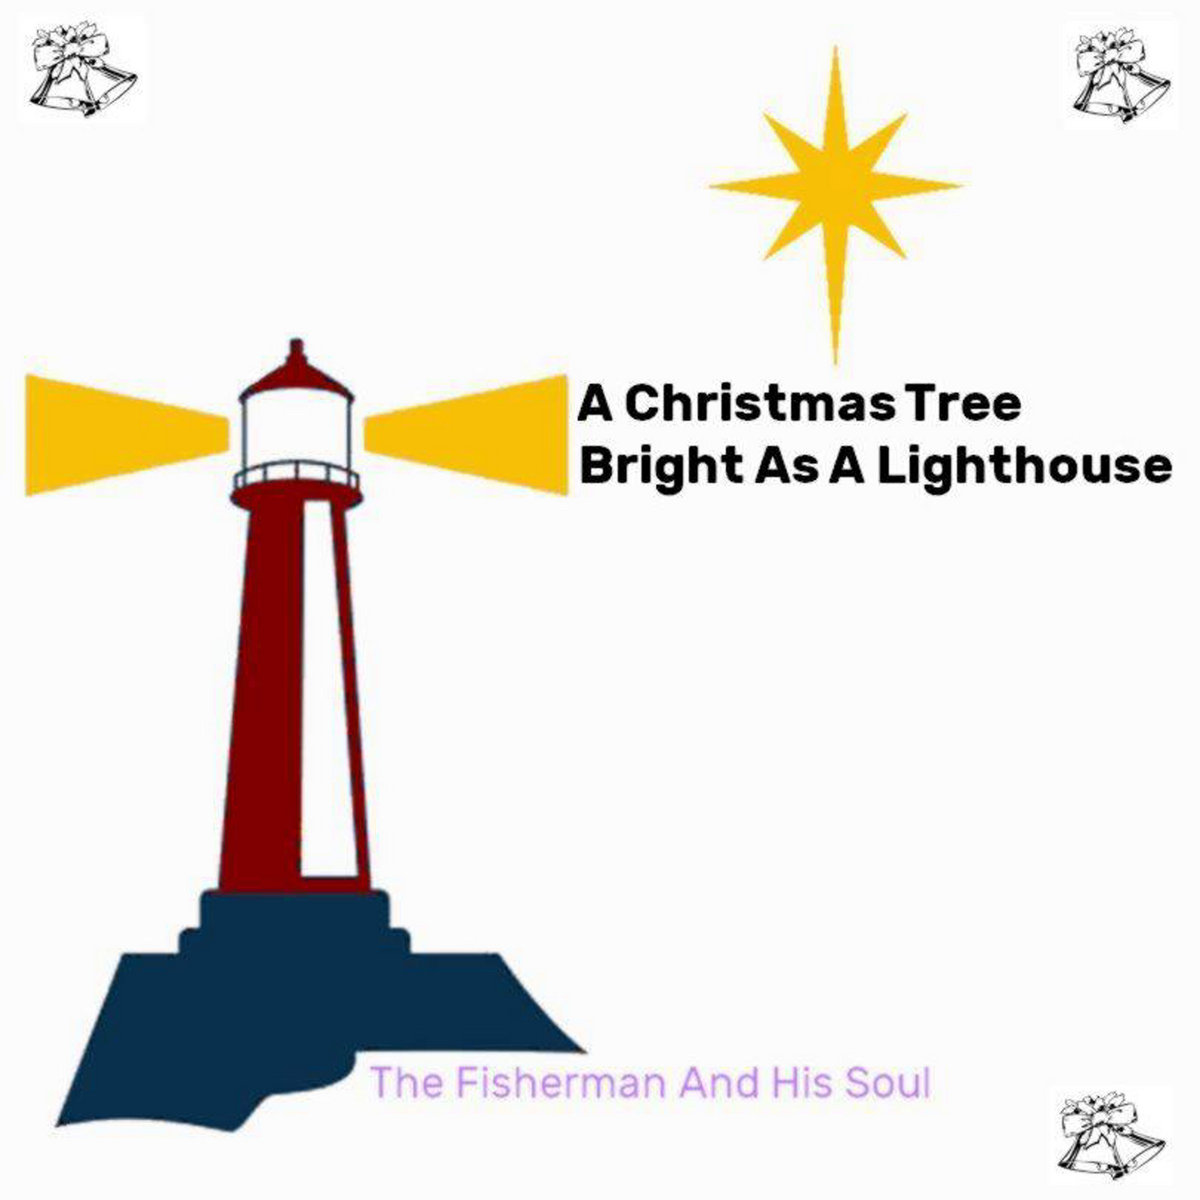 The Fisherman and his Soul - A Christmas Tree Bright as a Lighthouse